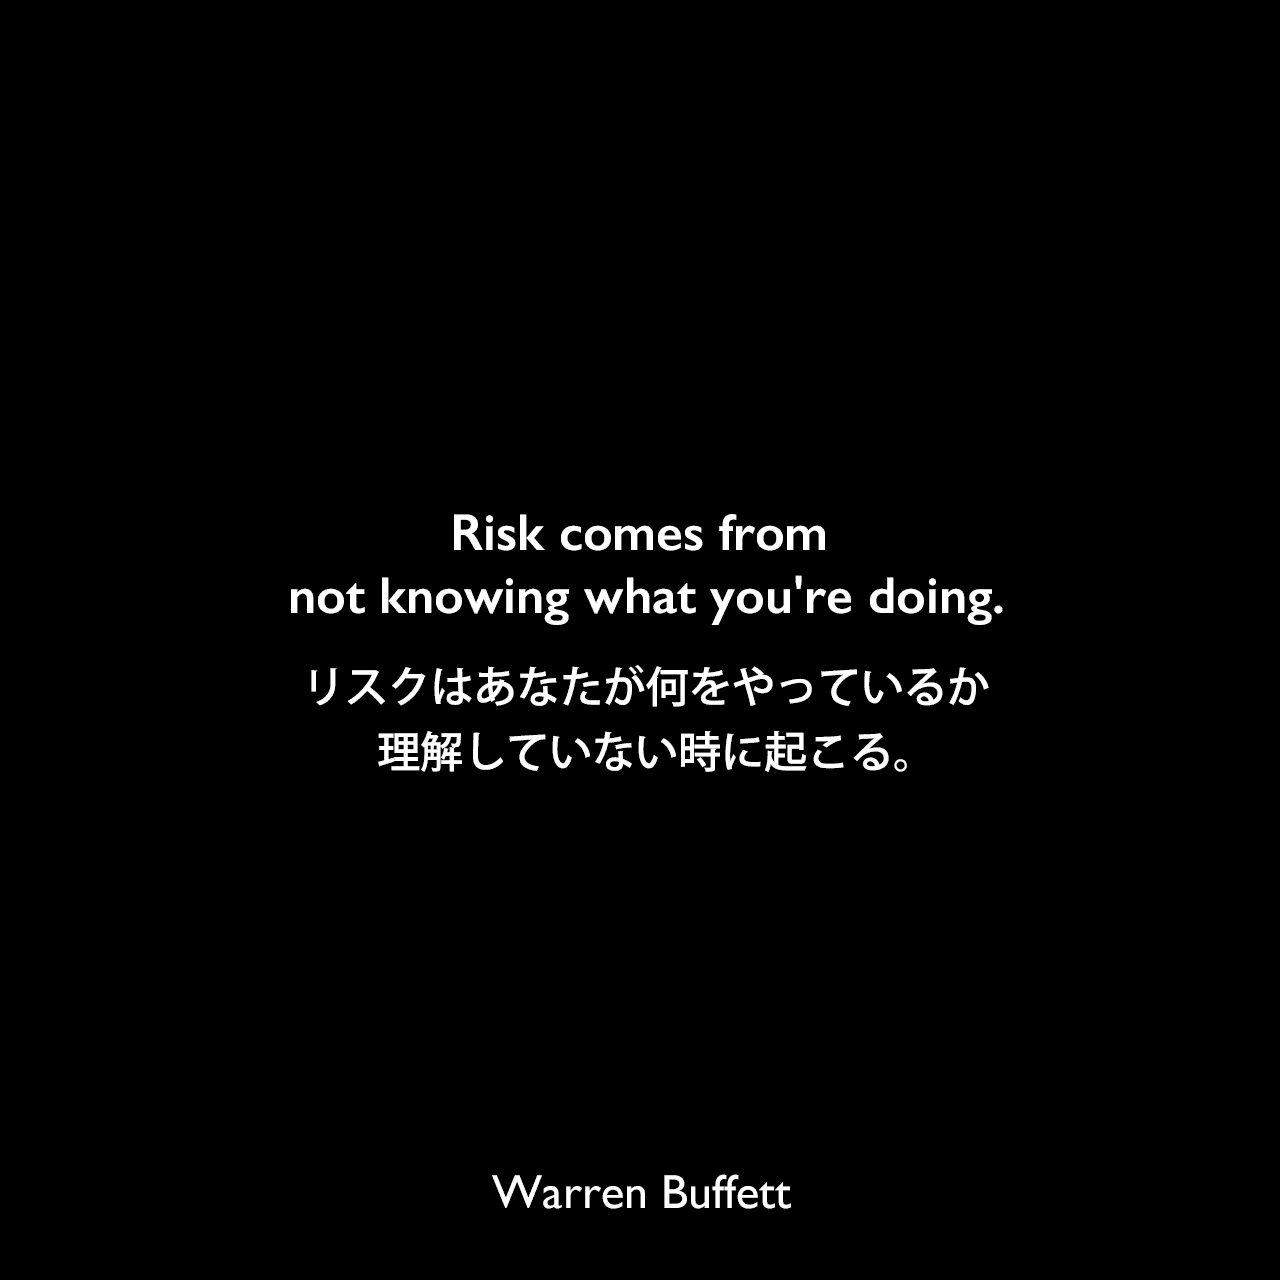 Risk comes from not knowing what you're doing.リスクはあなたが何をやっているか理解していない時に起こる。Warren Buffett